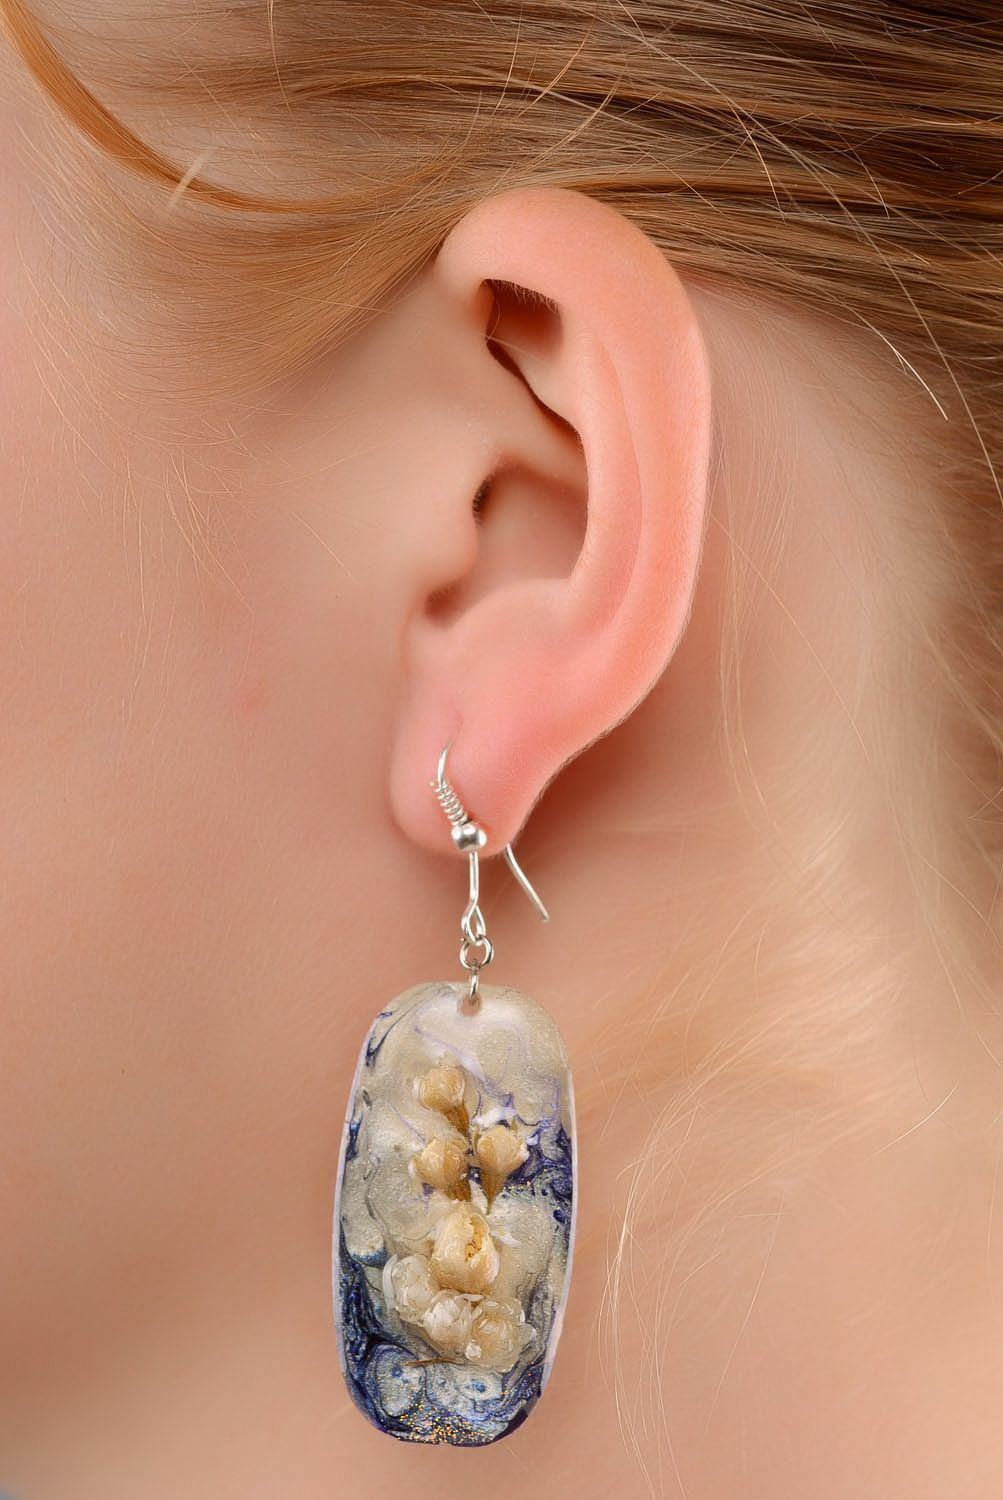 Earrings made of flowers and epoxy resin photo 3